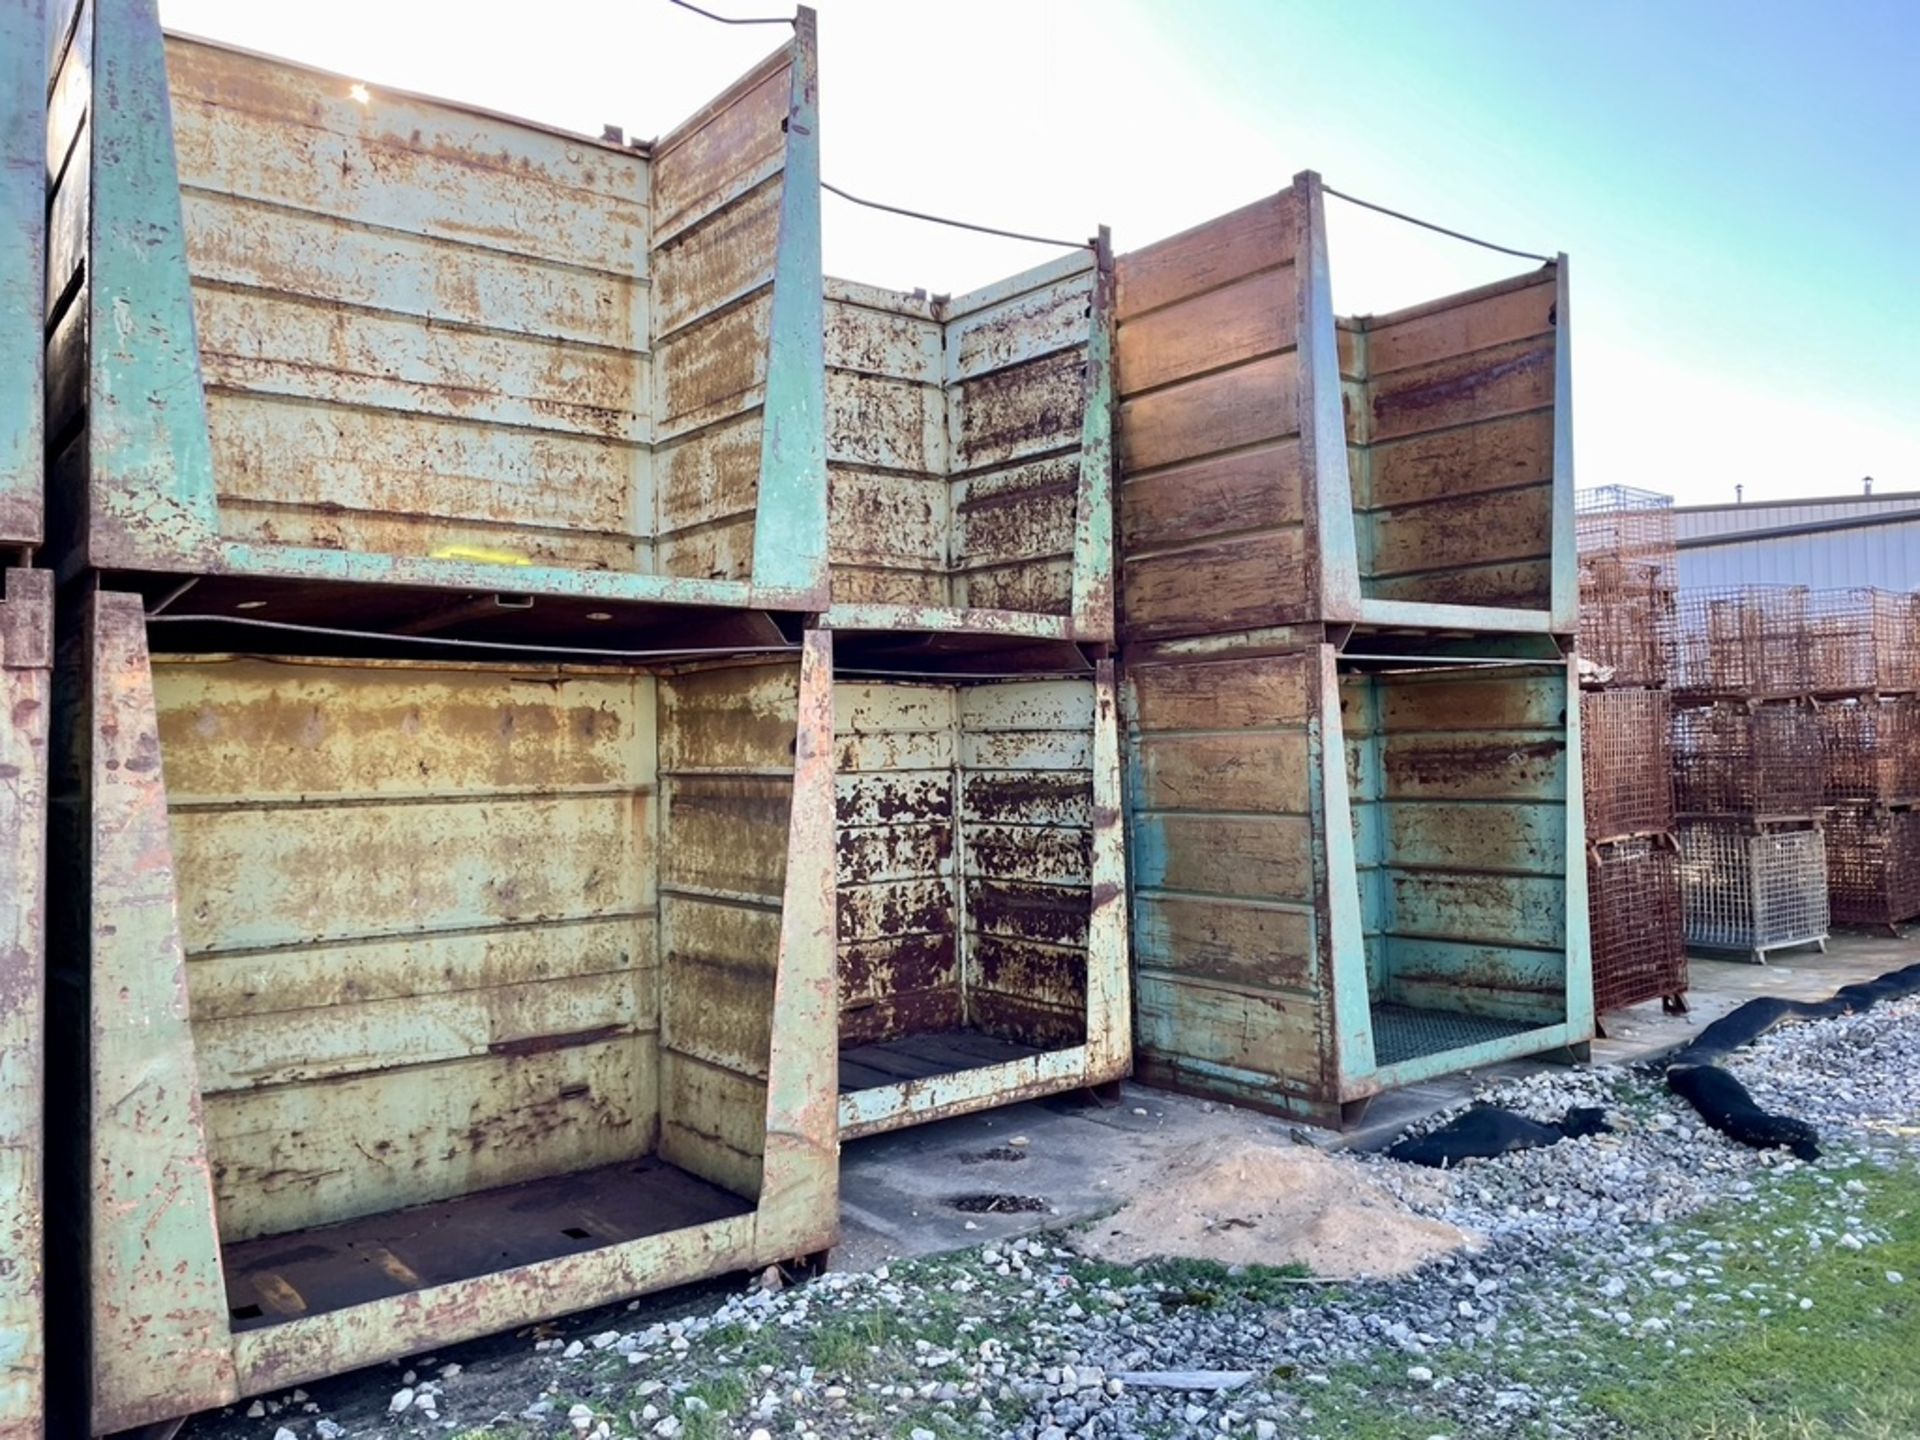 Approx 50 Steel Bins (Excludes and Wire Bins Shown) | Rig Fee $500